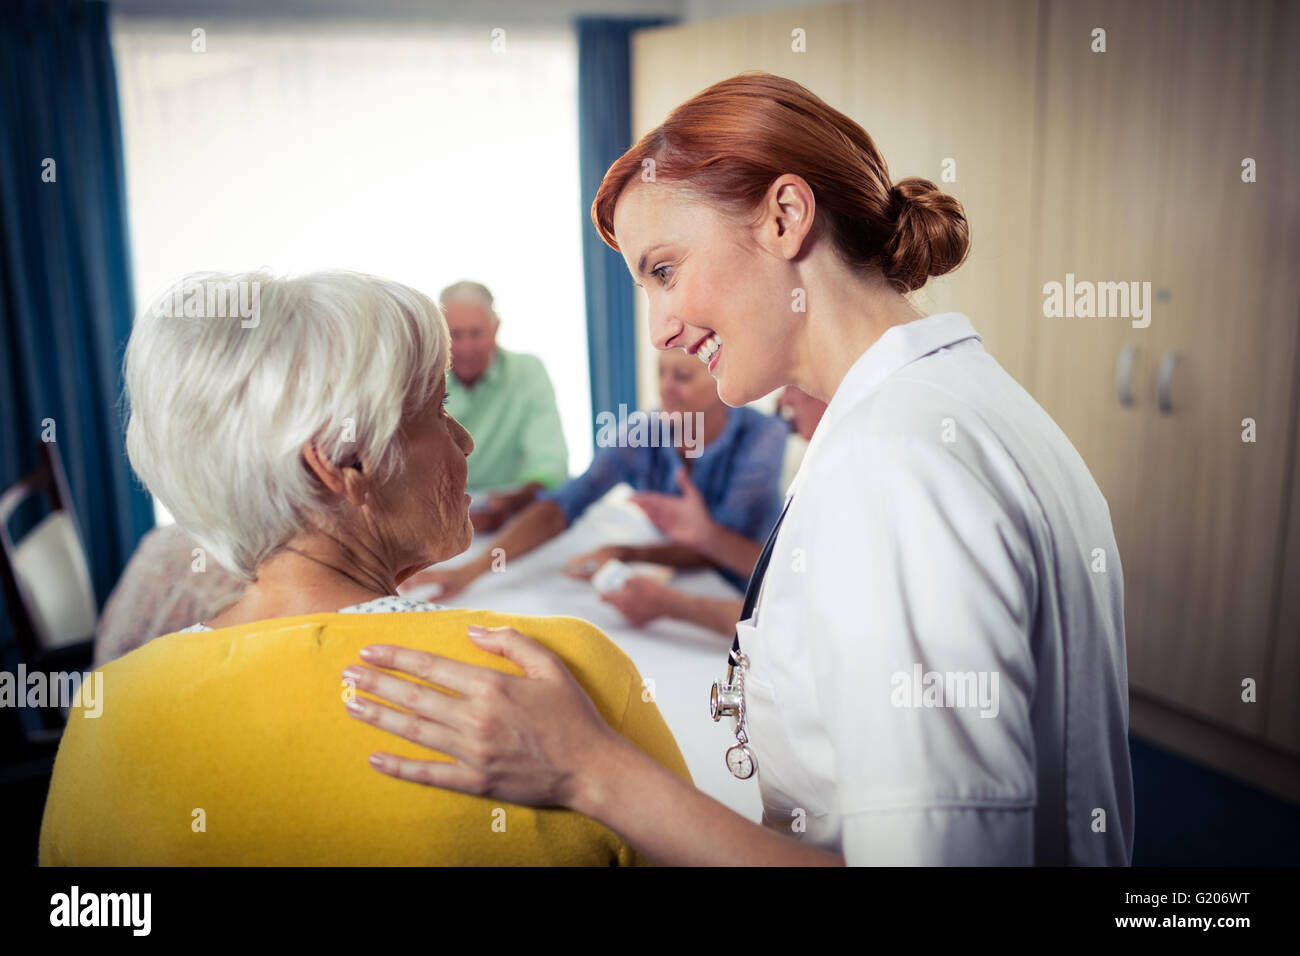 Pensioners playing cards with nurse Stock Photo